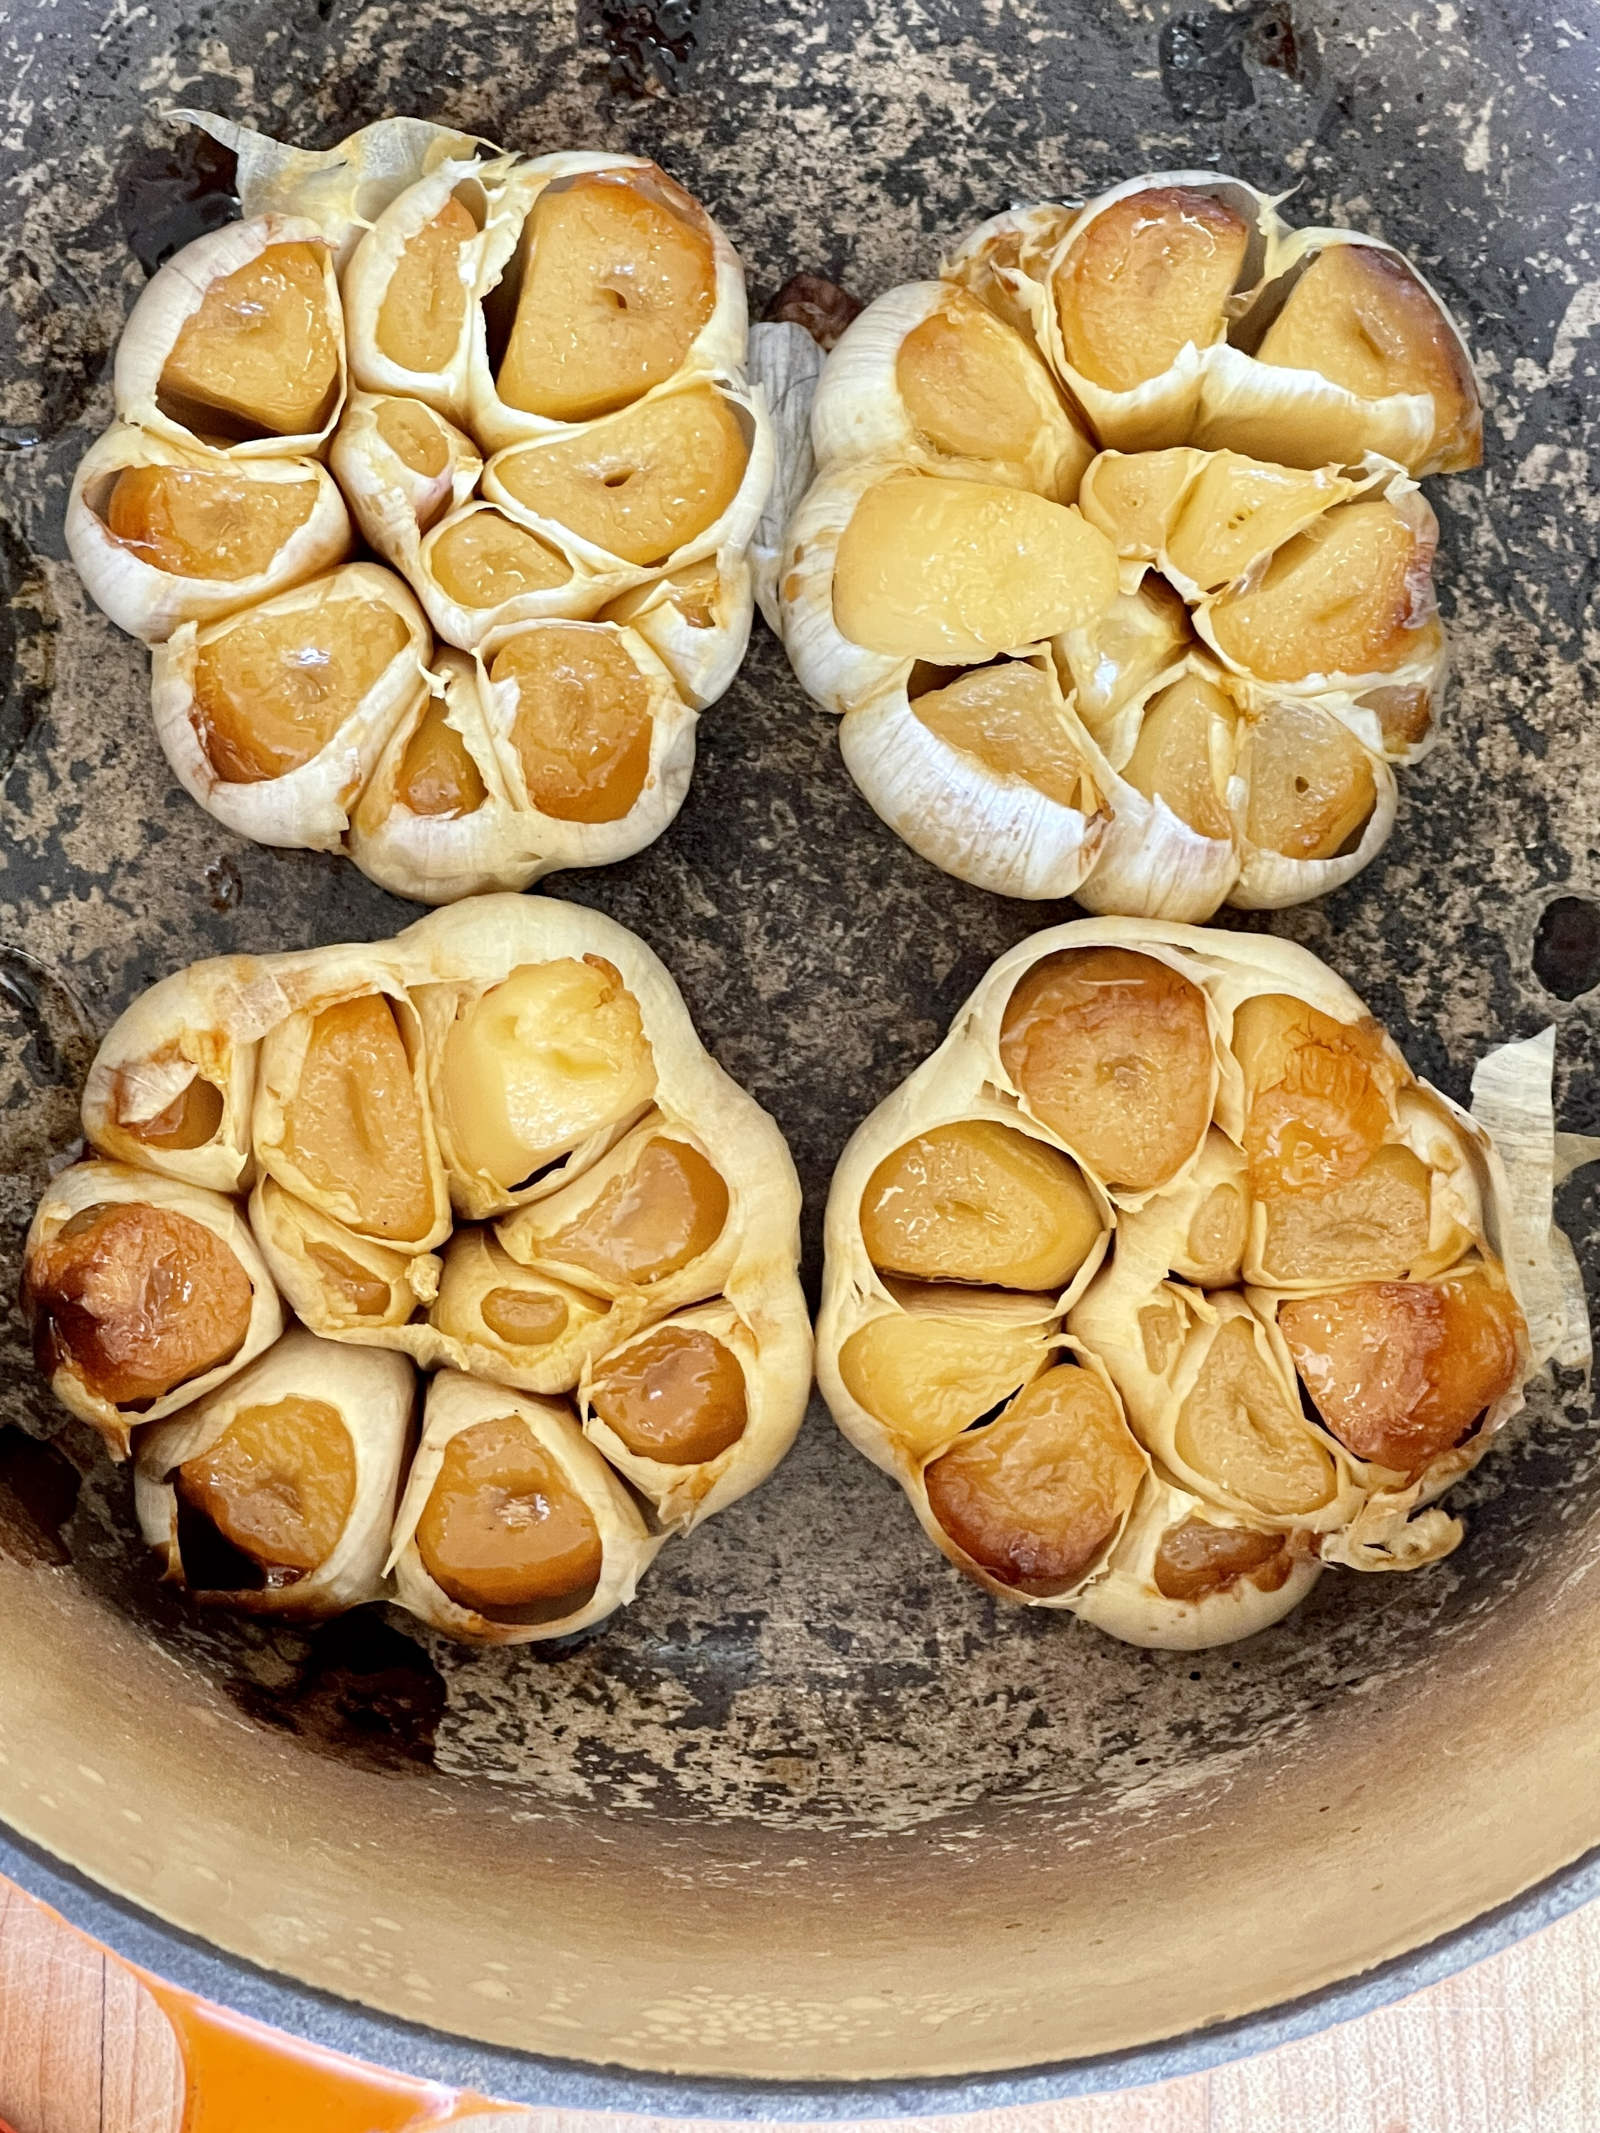 Four heads of roasted heads of garlic sit inside a Dutch oven.